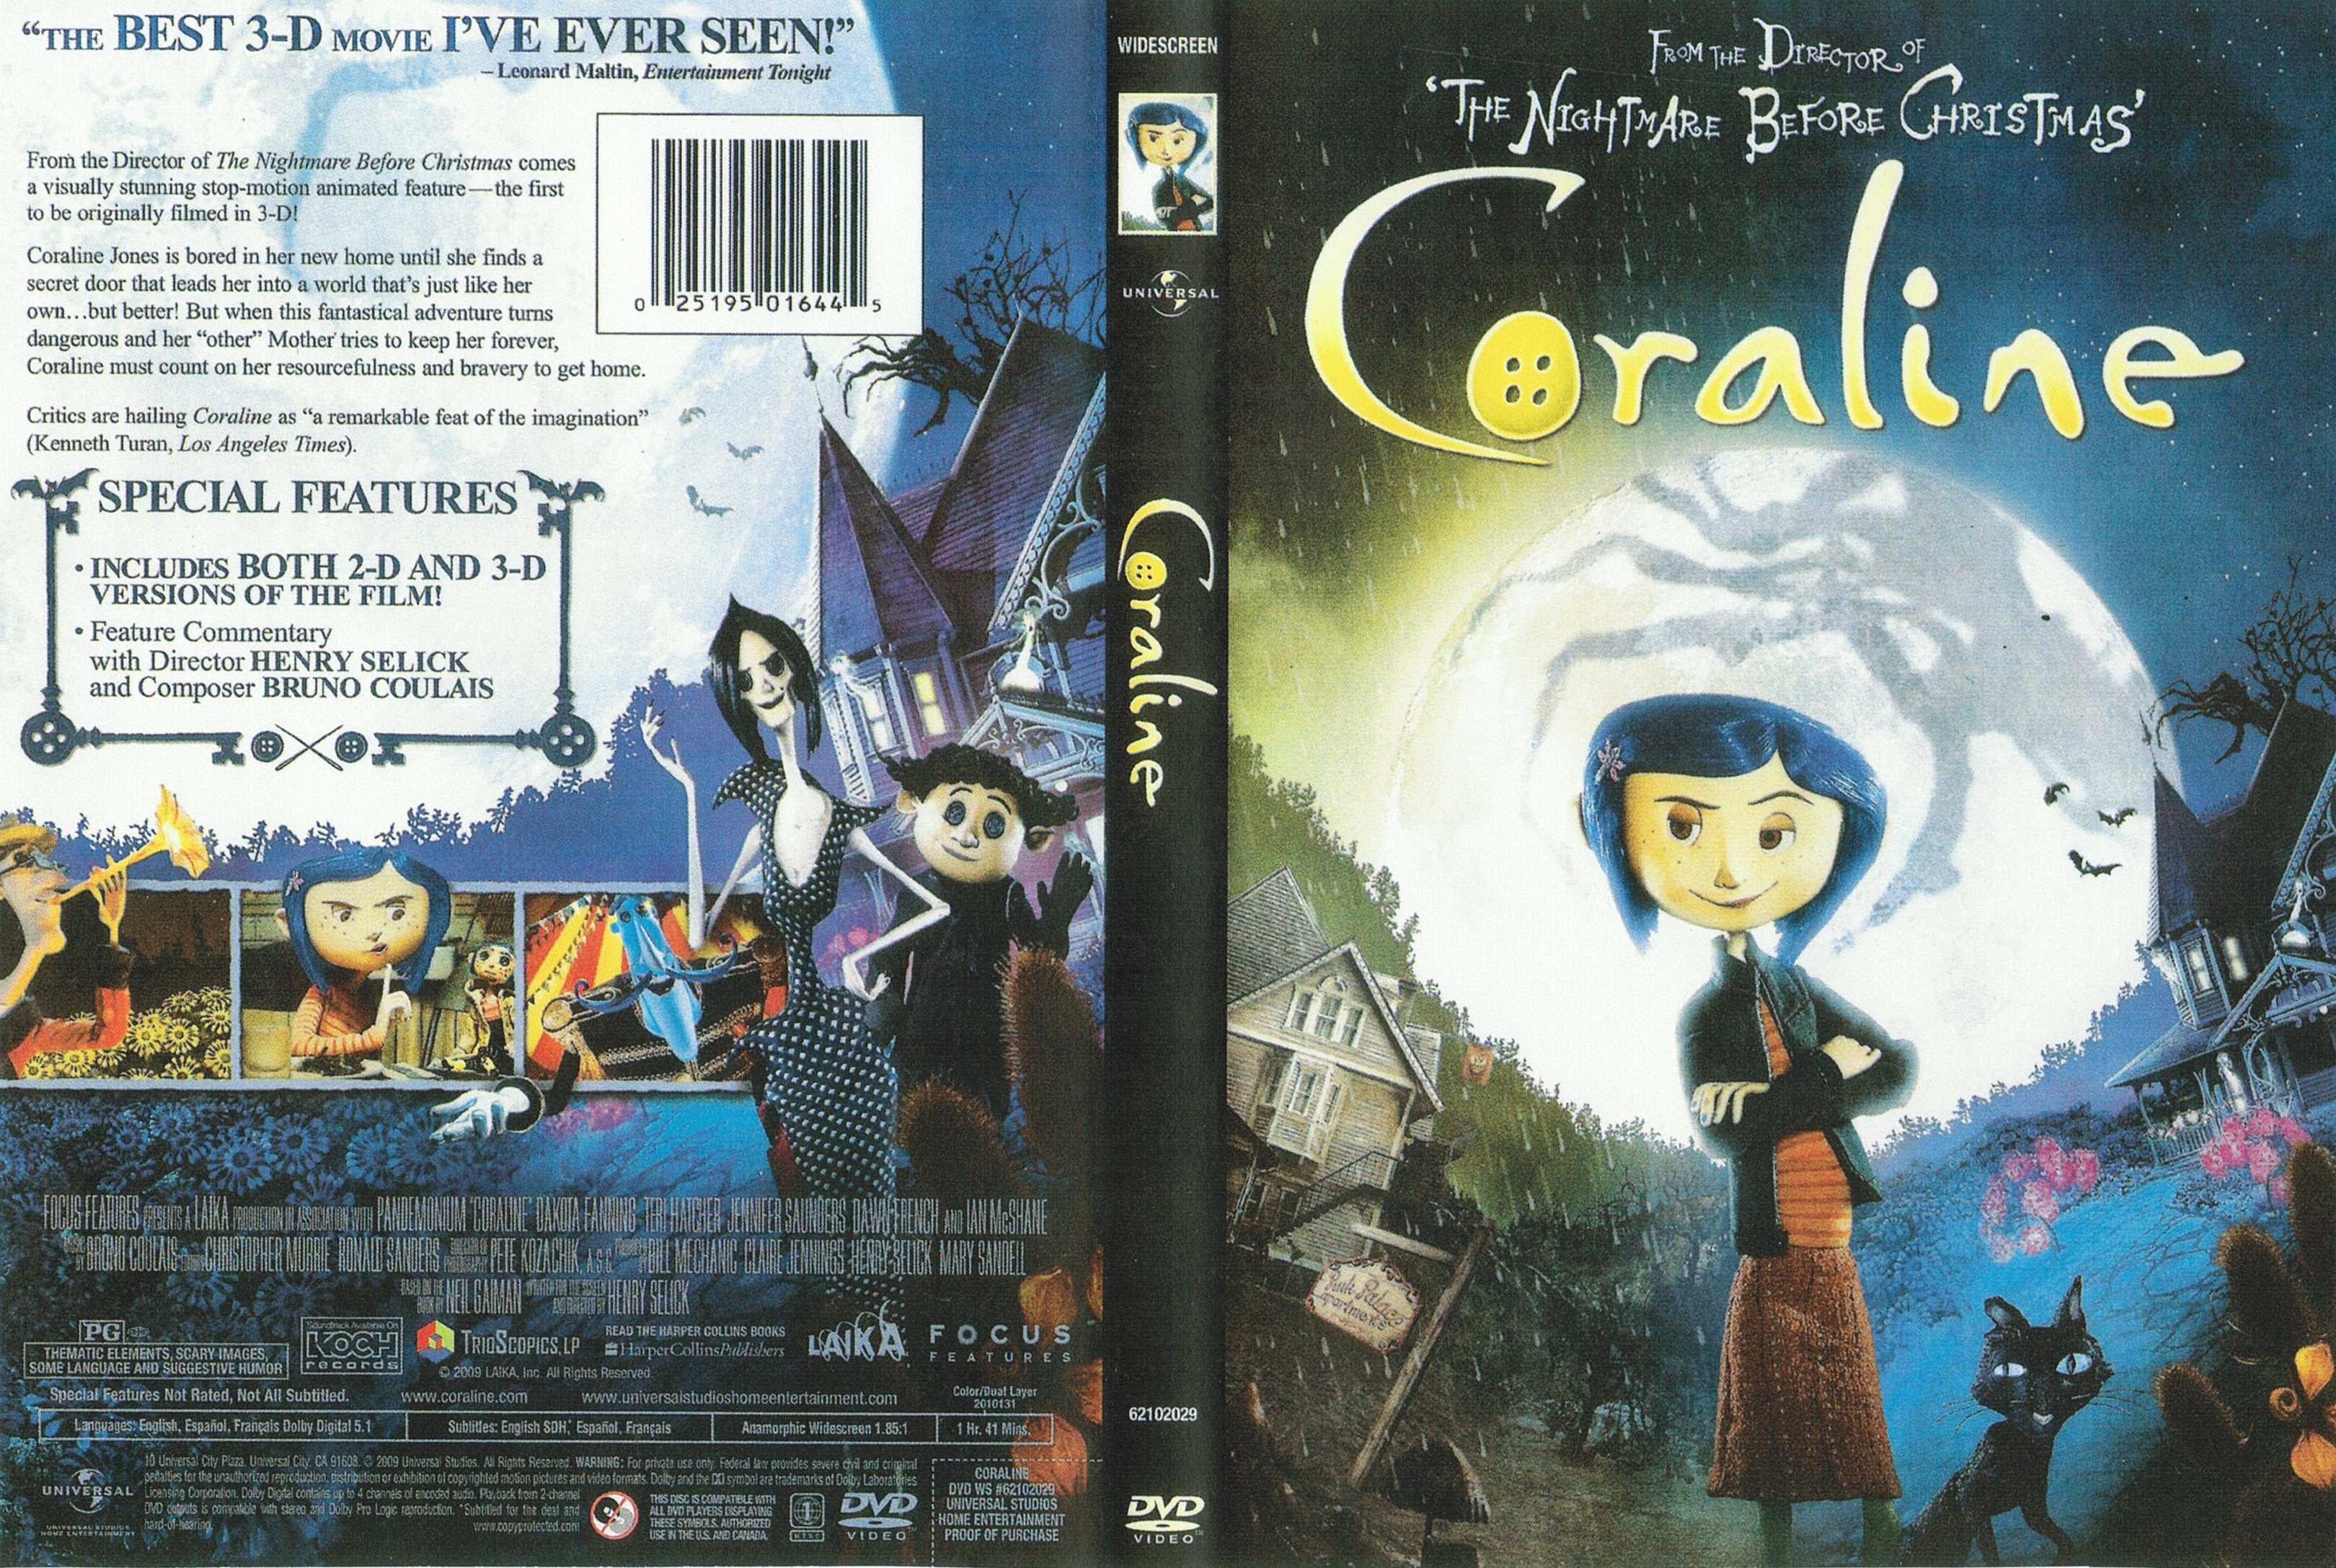 Covers Box Sk Coraline 2009 High Quality Dvd Blueray Movie